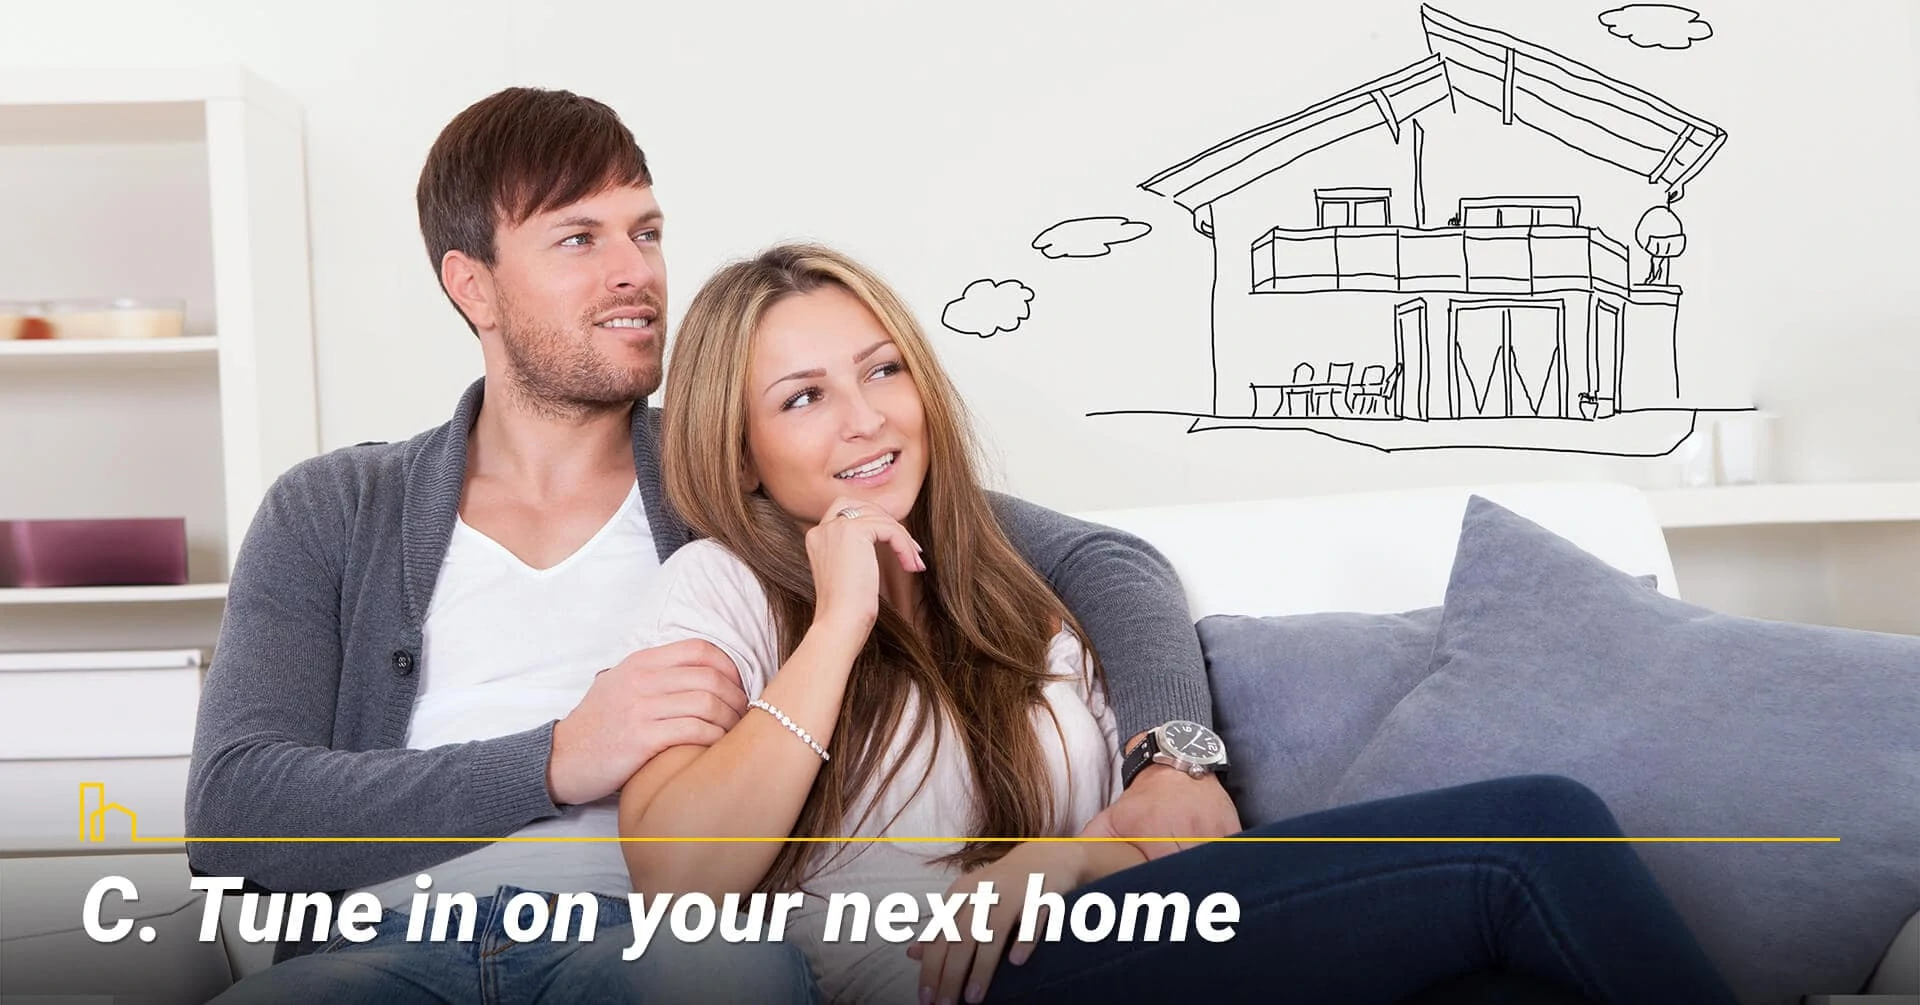 Tune in on your next home, think about your next home